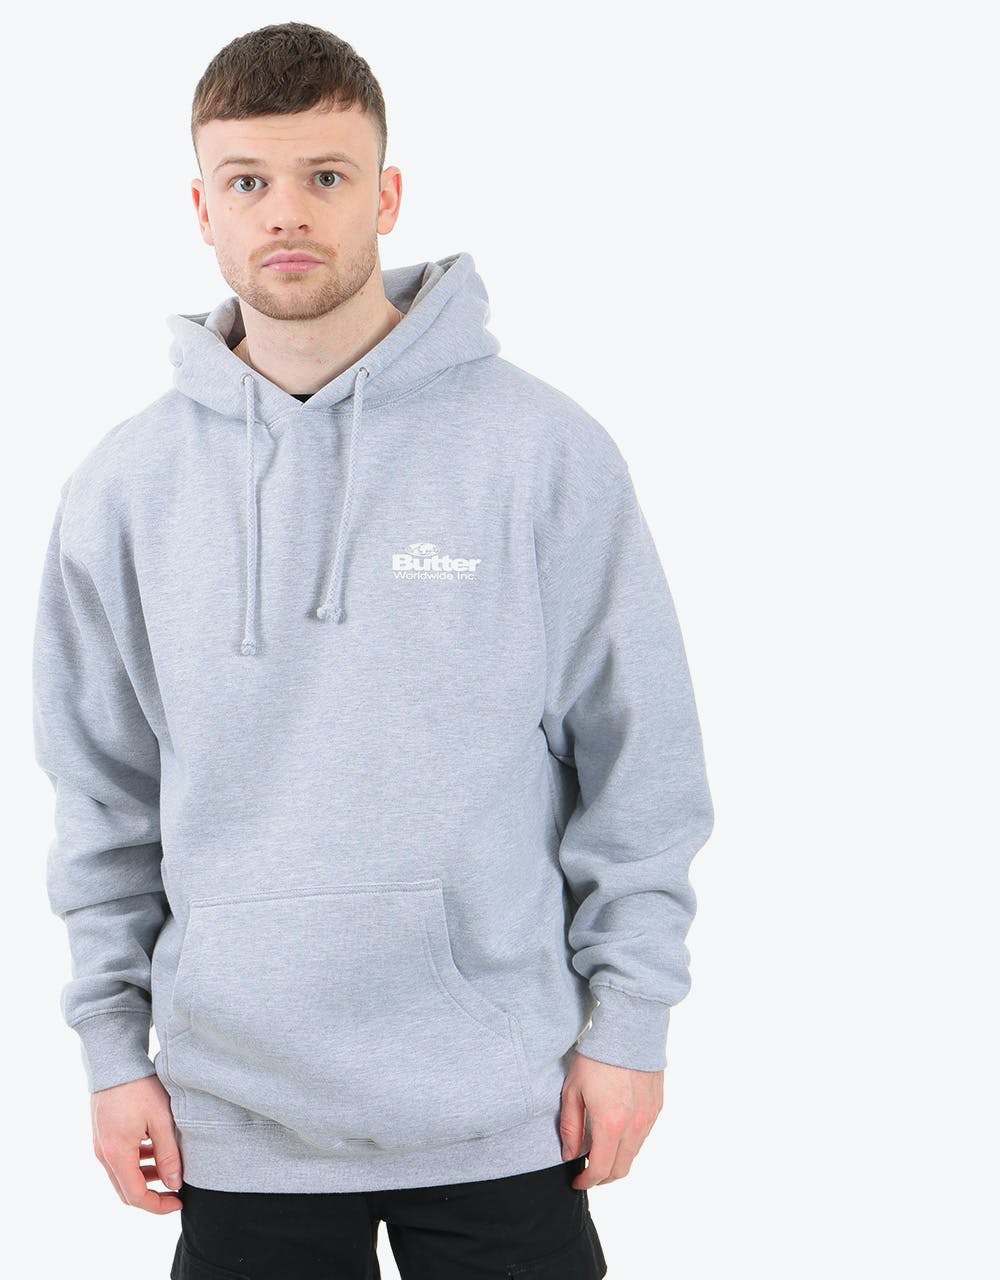 Butter Goods Incorporated Logo Pullover Hoodie - Heather Grey